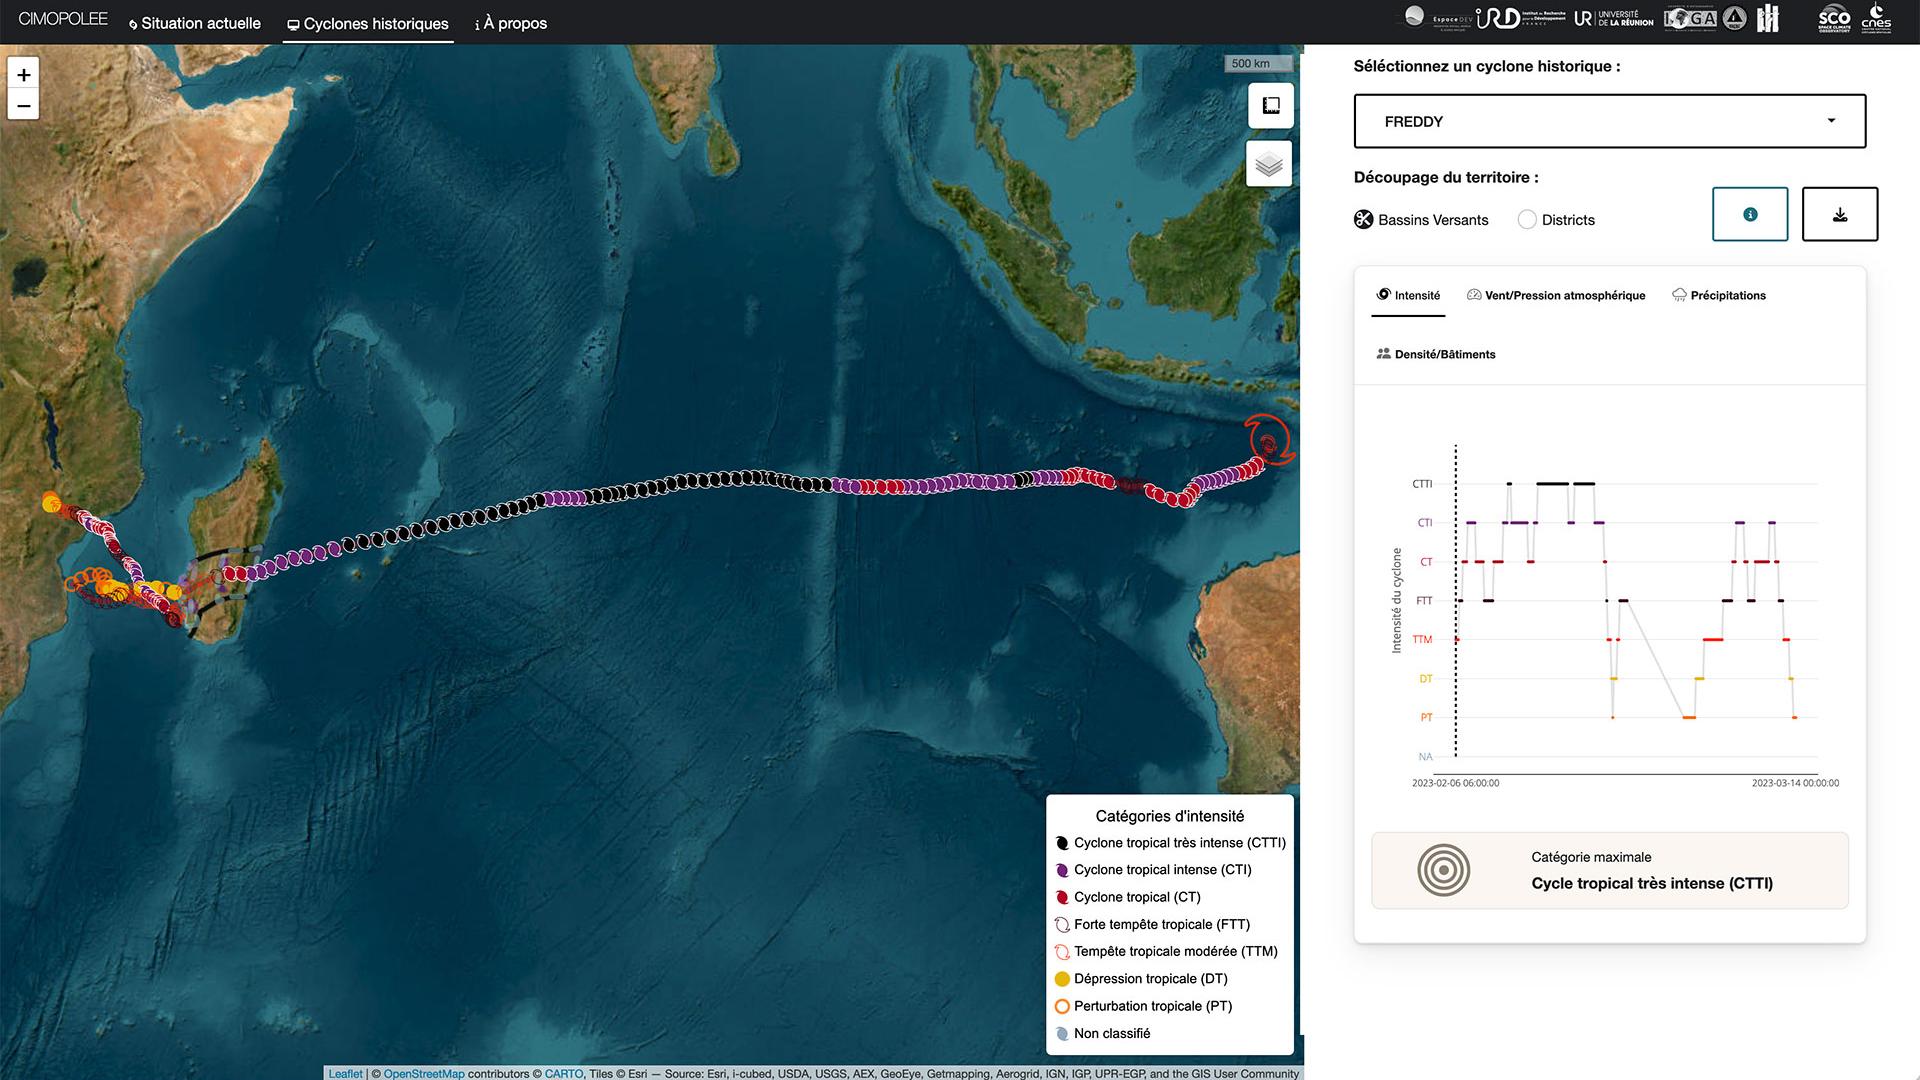 Monitoring the cyclone situation in real time, Cimopolée compiles all the information relating to a cyclone, such as here the trajectory of Freddy in February 2023 with, on the right, the evolution of its intensity.